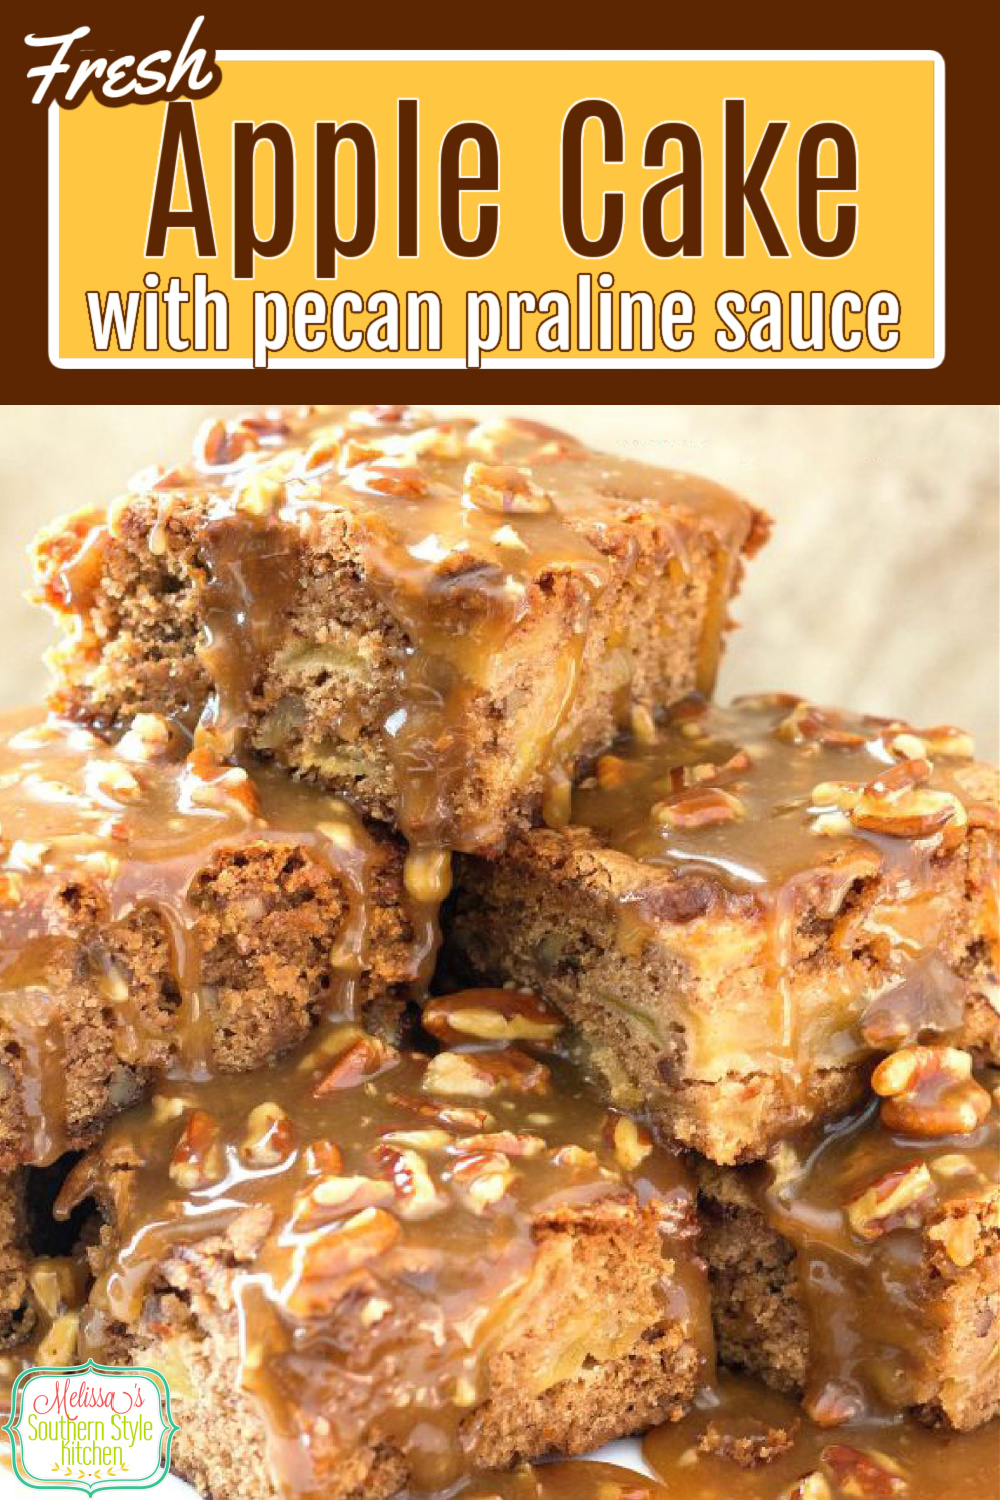 This Fresh Apple Cake is drizzled with a rich and buttery pecan praline sauce after baking #freshapplecake #apples #pecanpralines #pralinesauce #desserts #dessertfoodrecipes #cakes #cakerecipes #applecake #southerncakes #southernrecipes #southernfood via @melissasssk